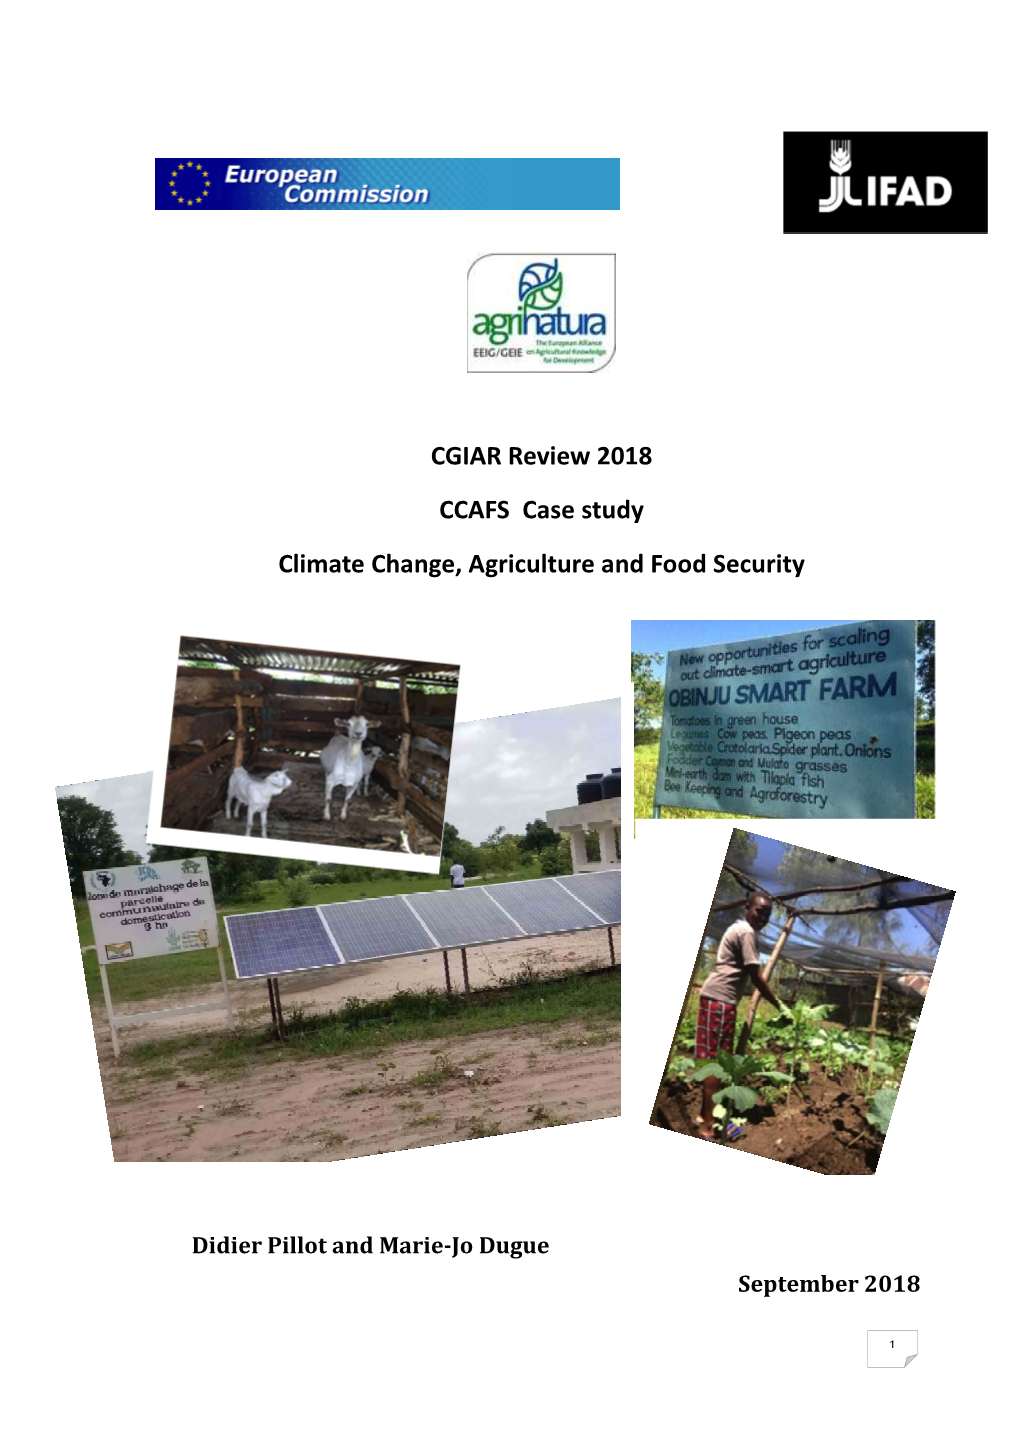 CGIAR Review 2018 CCAFS Case Study Climate Change, Agriculture and Food Security